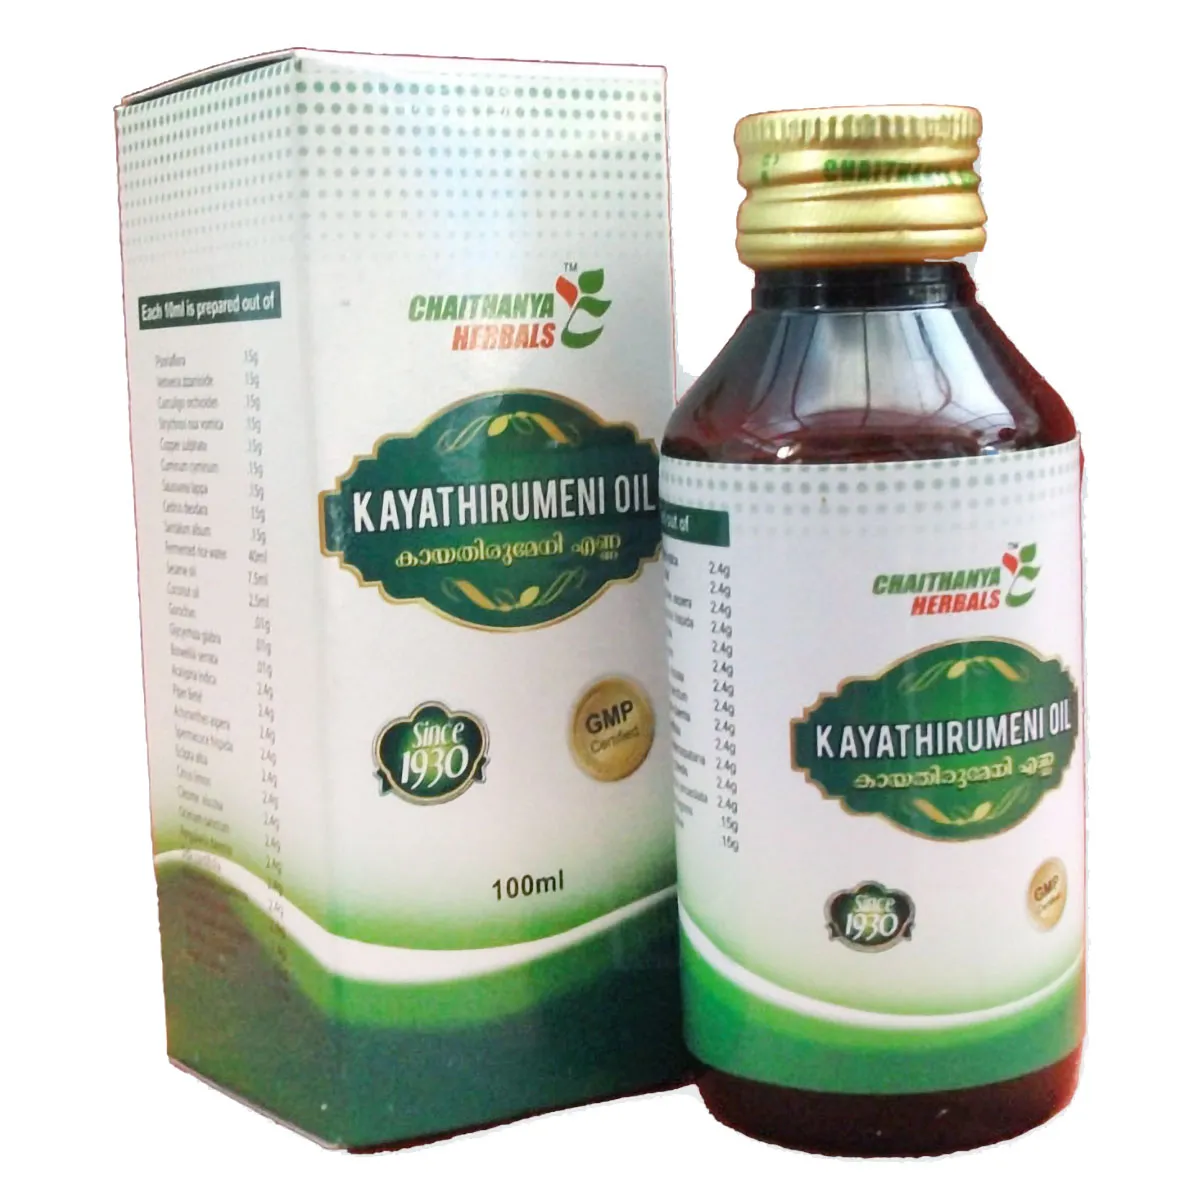 Turpentine Liniment IP 66, 400ml, Prescription at Rs 195/bottle in